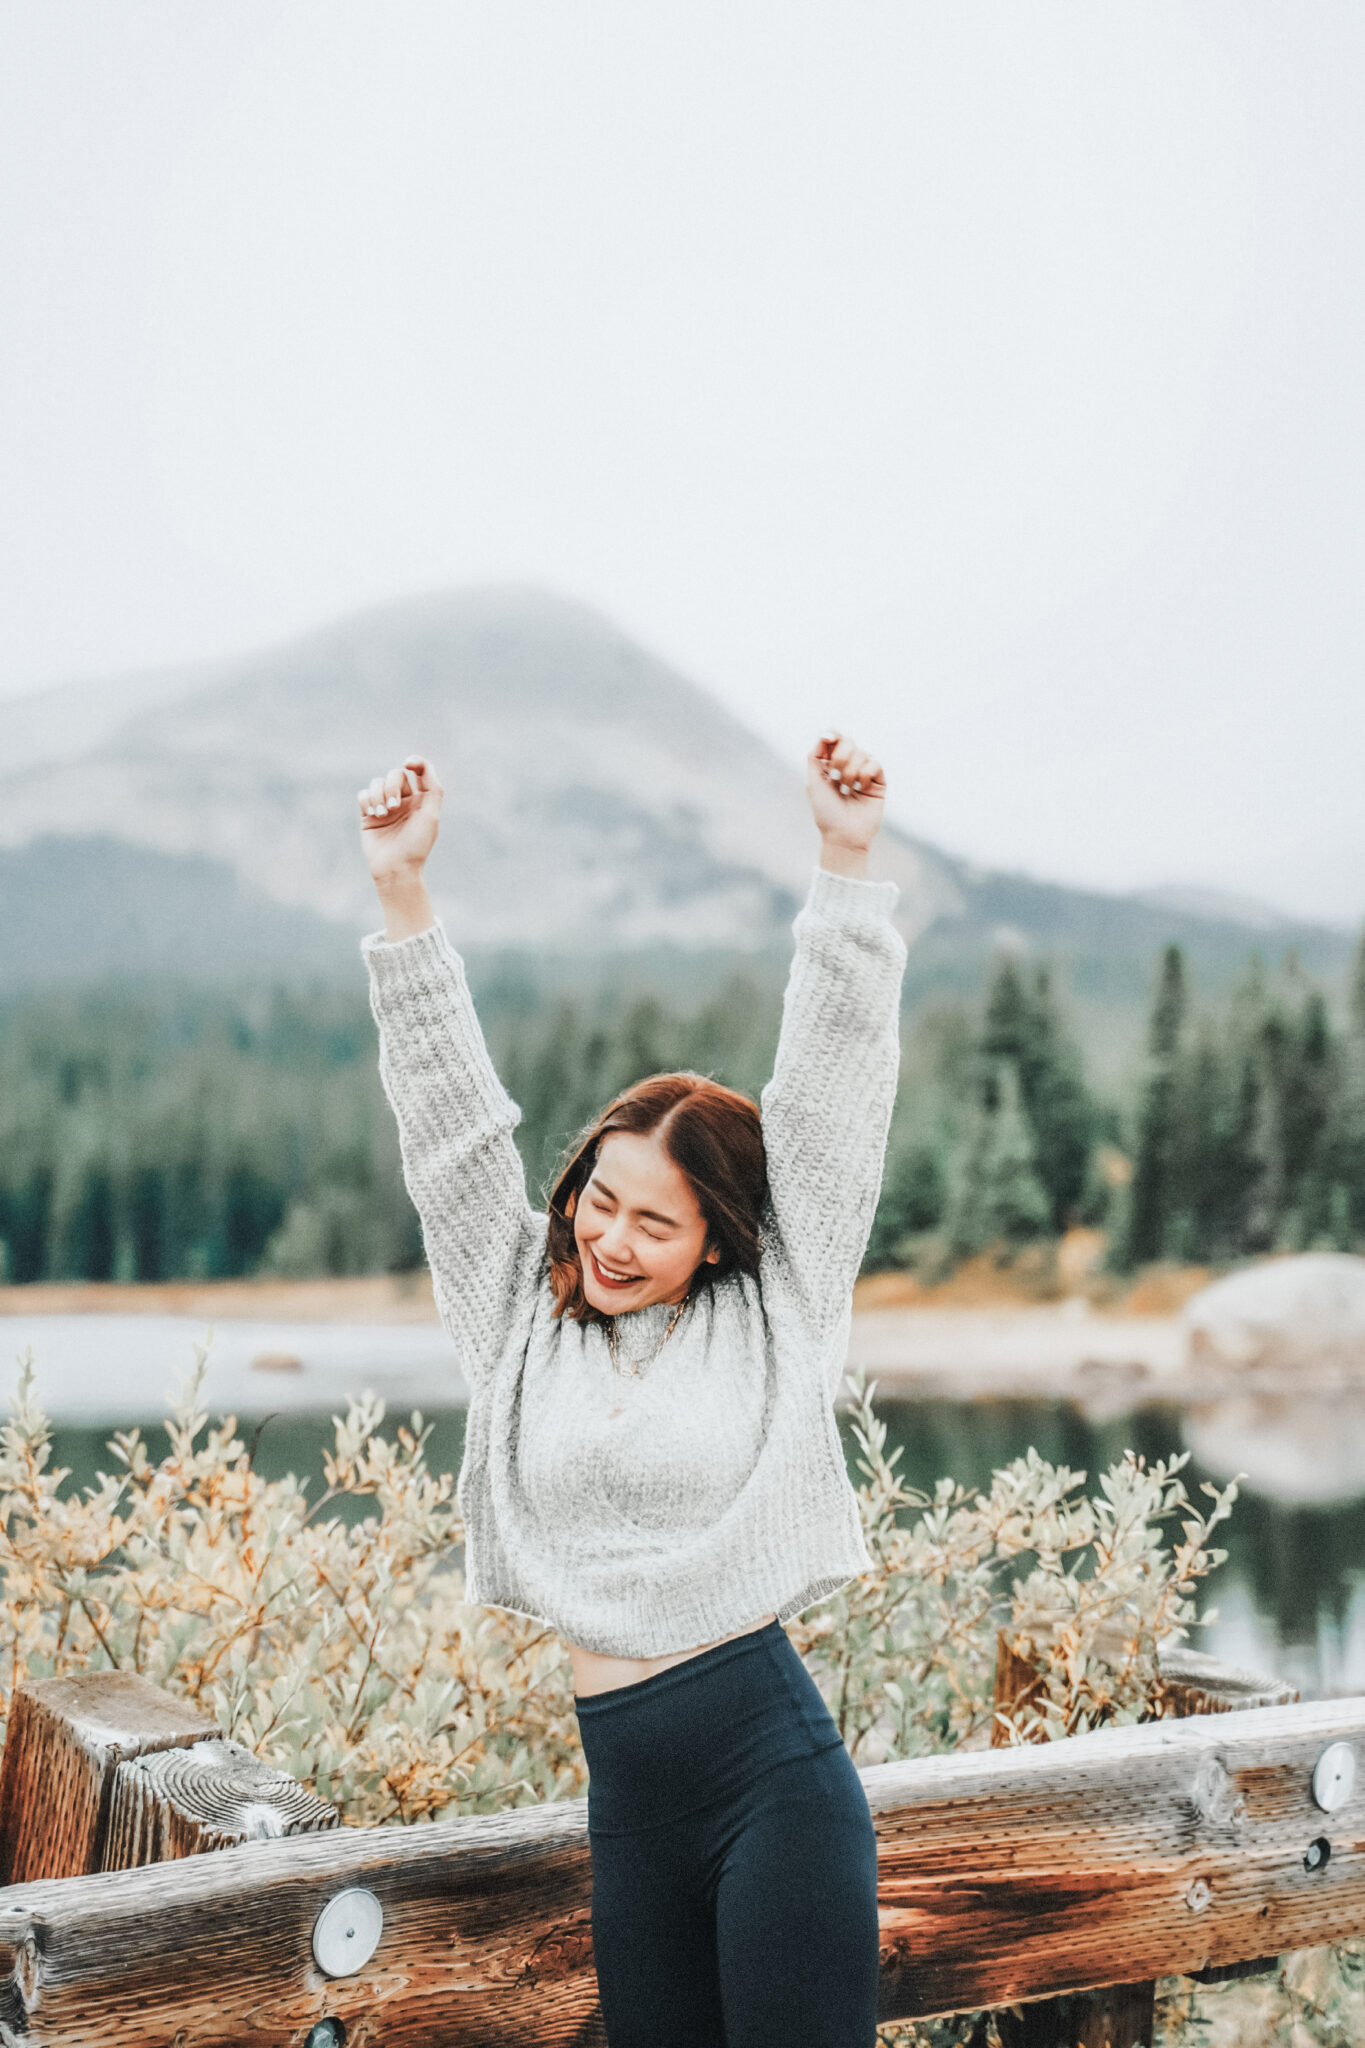 A woman throws her hands in the air, closes her eyes, and smiles. She is outside by a lake surrounded by nature. This article covers style tips for staying warm without looking bulky.